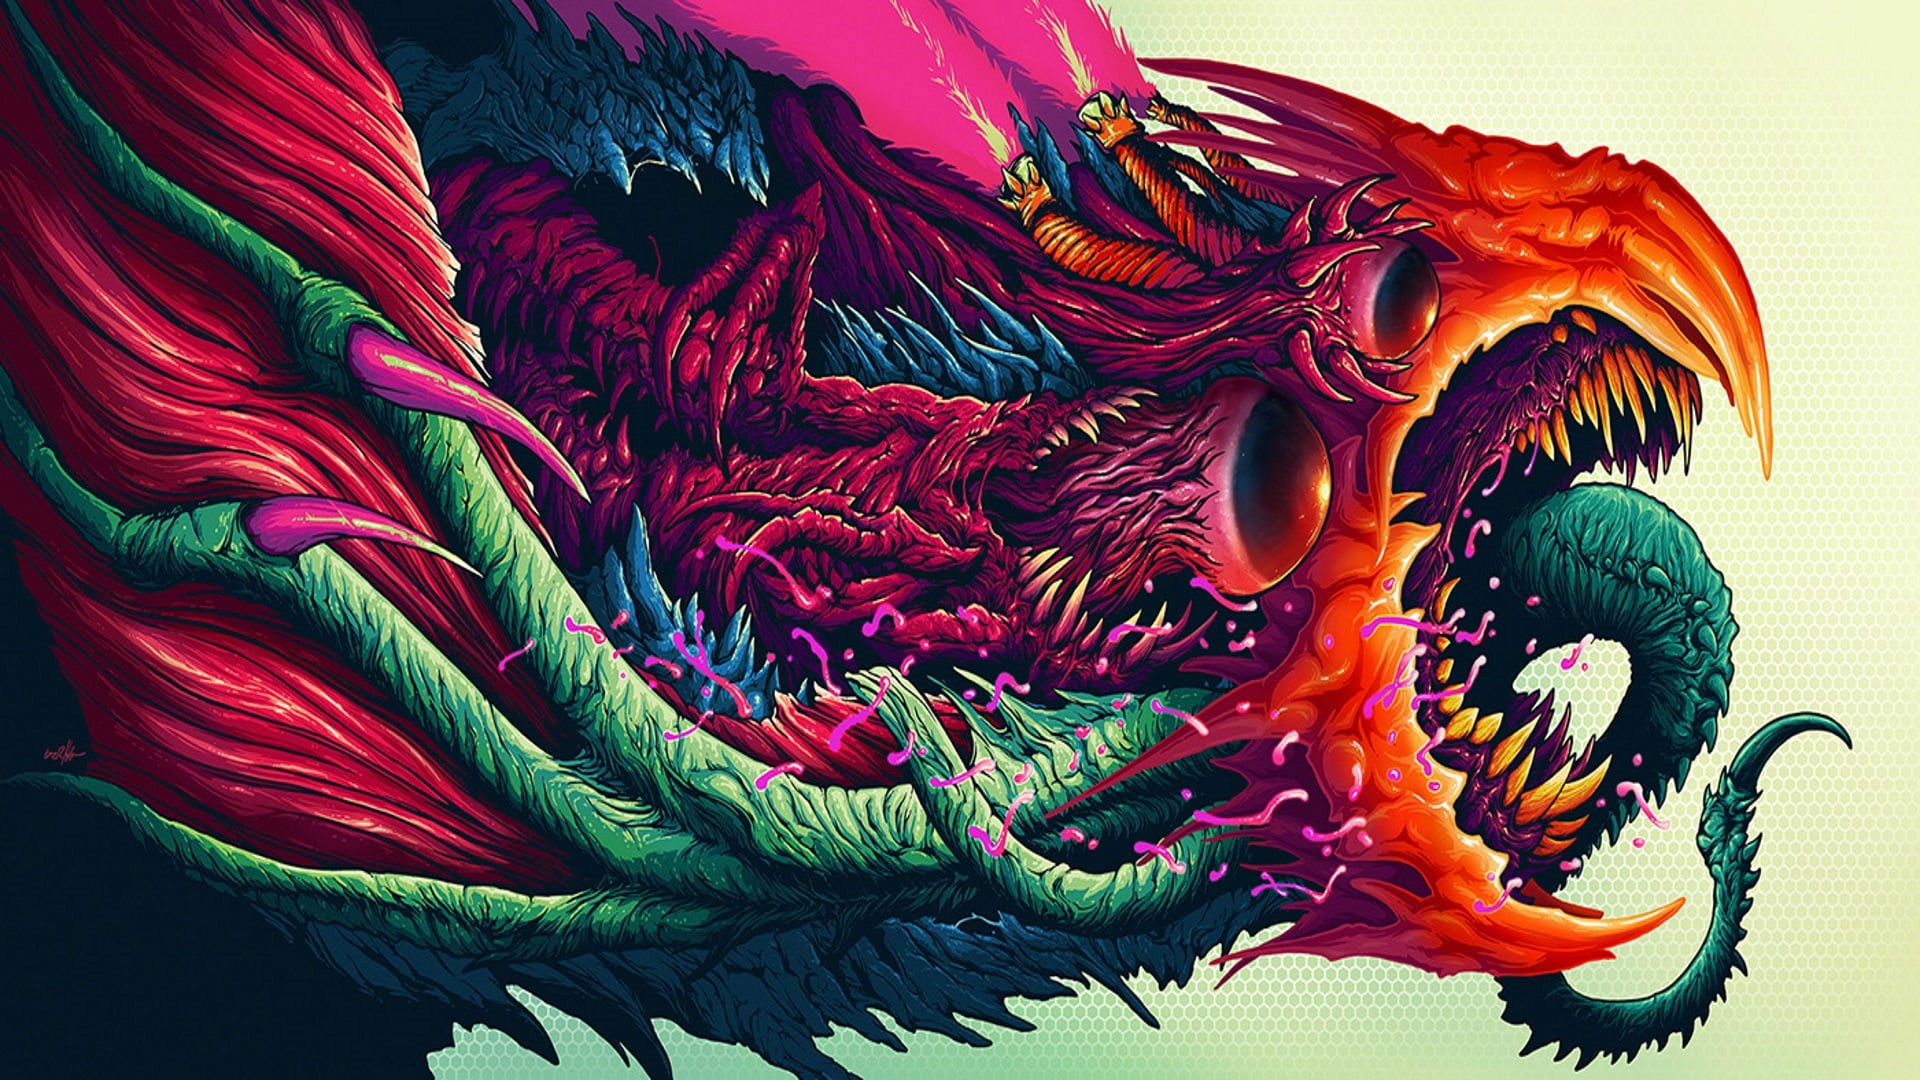 Wallpaper Dragon Illustration, Psychedelic, Trippy, Colorful - Wallpaperforu